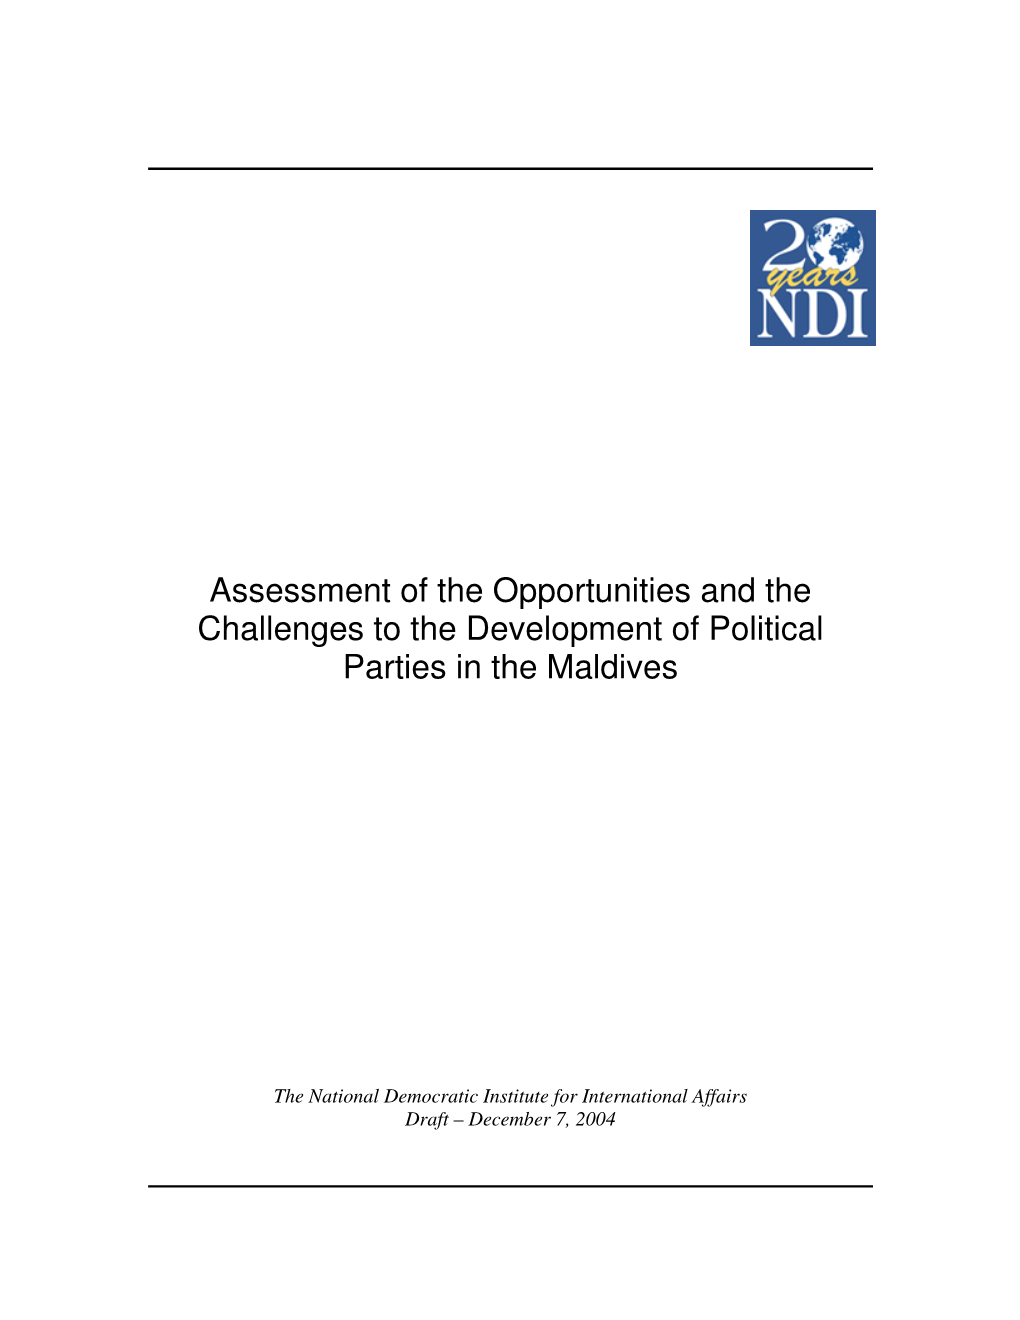 Assessment of the Opportunities and the Challenges to the Development of Political Parties in the Maldives